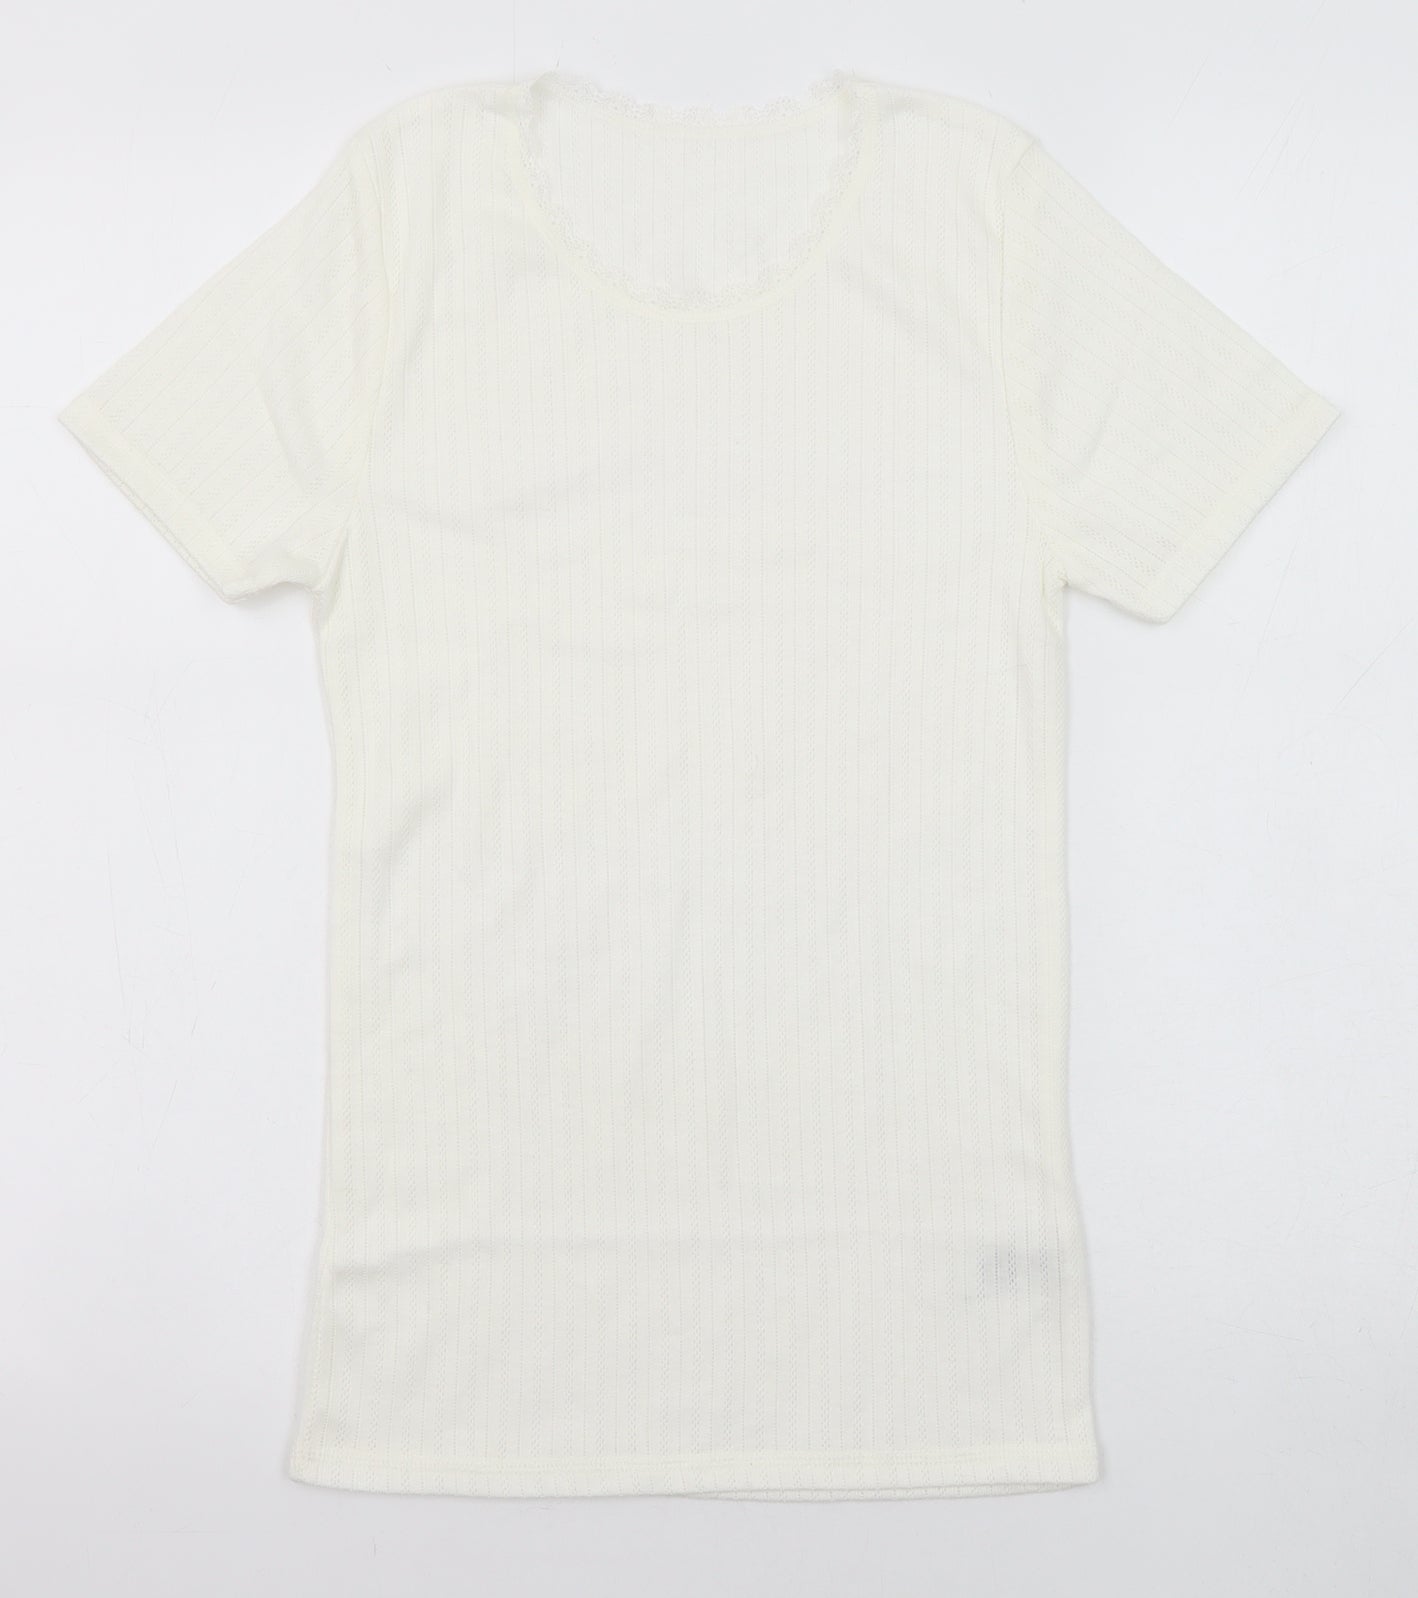 Marks and Spencer Womens White Geometric Polyester Basic T-Shirt Size 12 Round Neck - Lace Trim